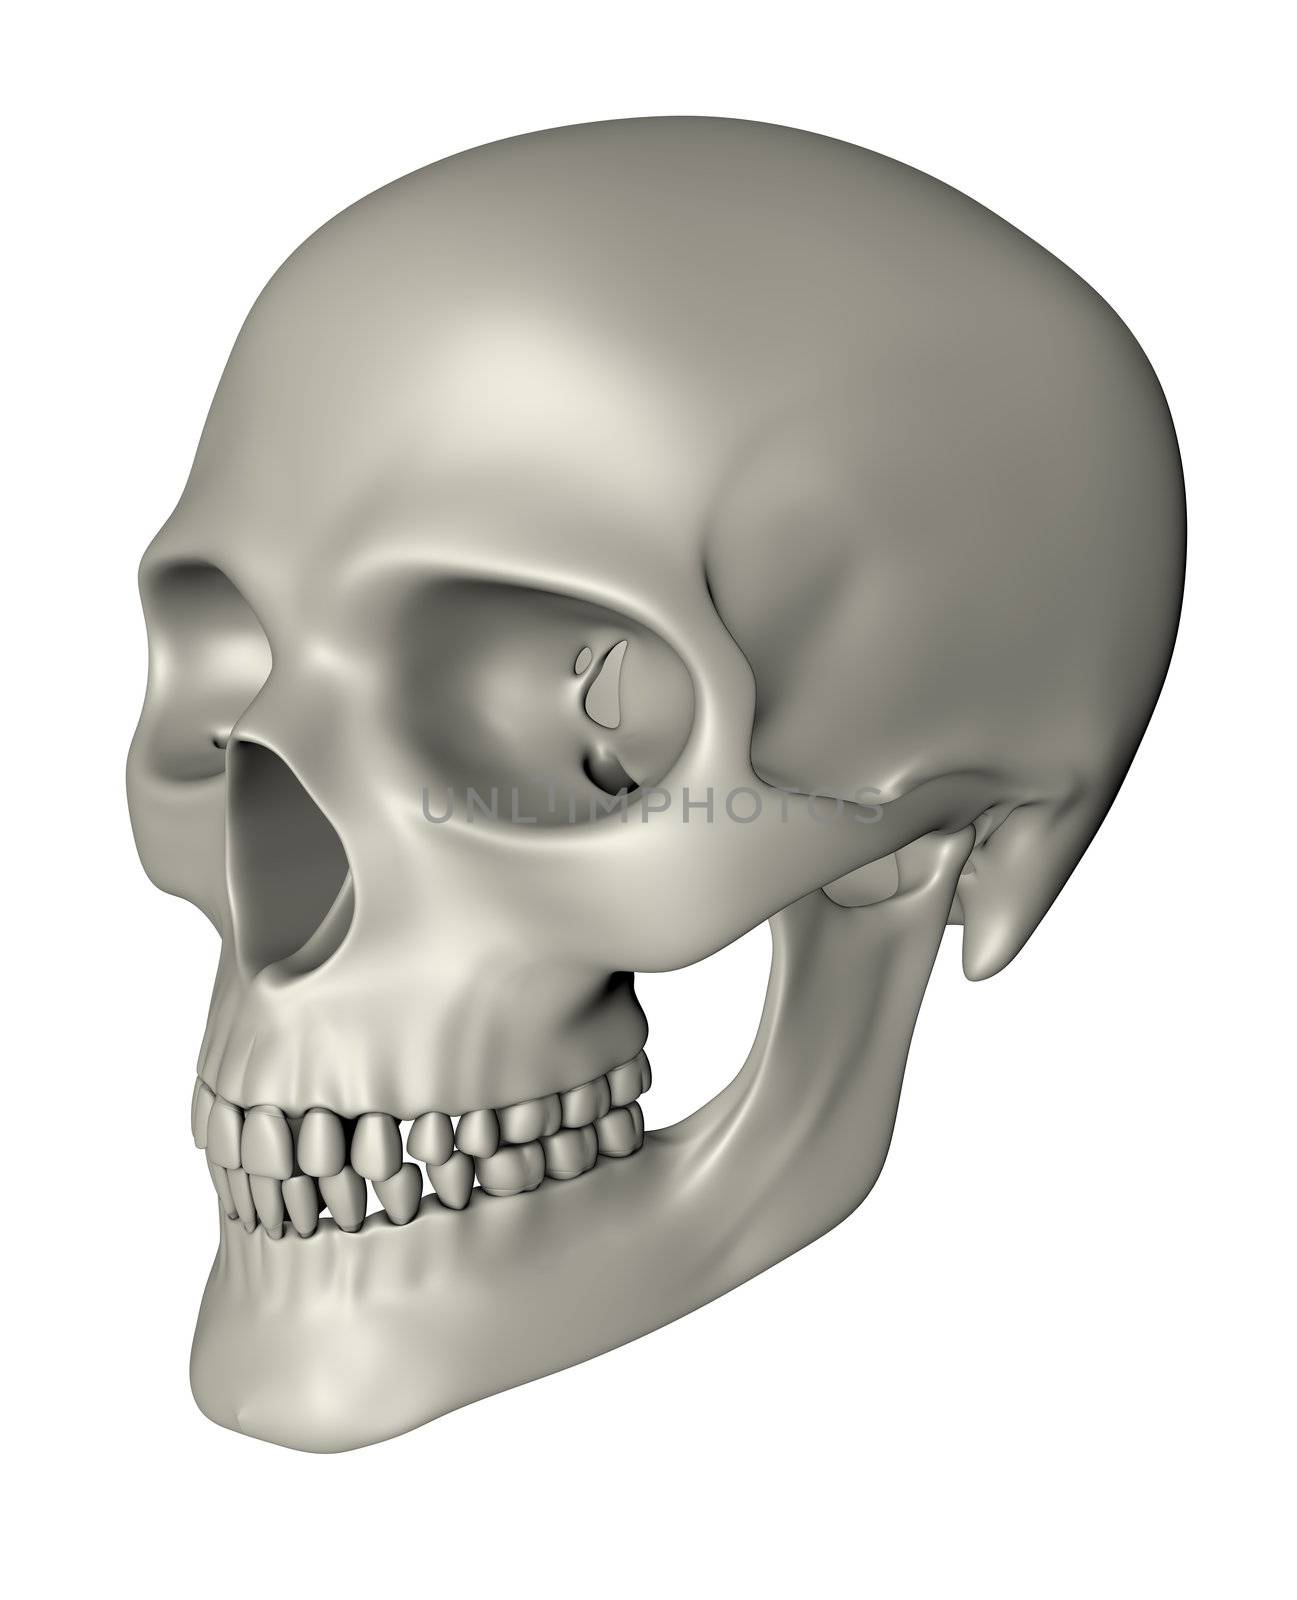 rendered image of a human skull - oblique projection